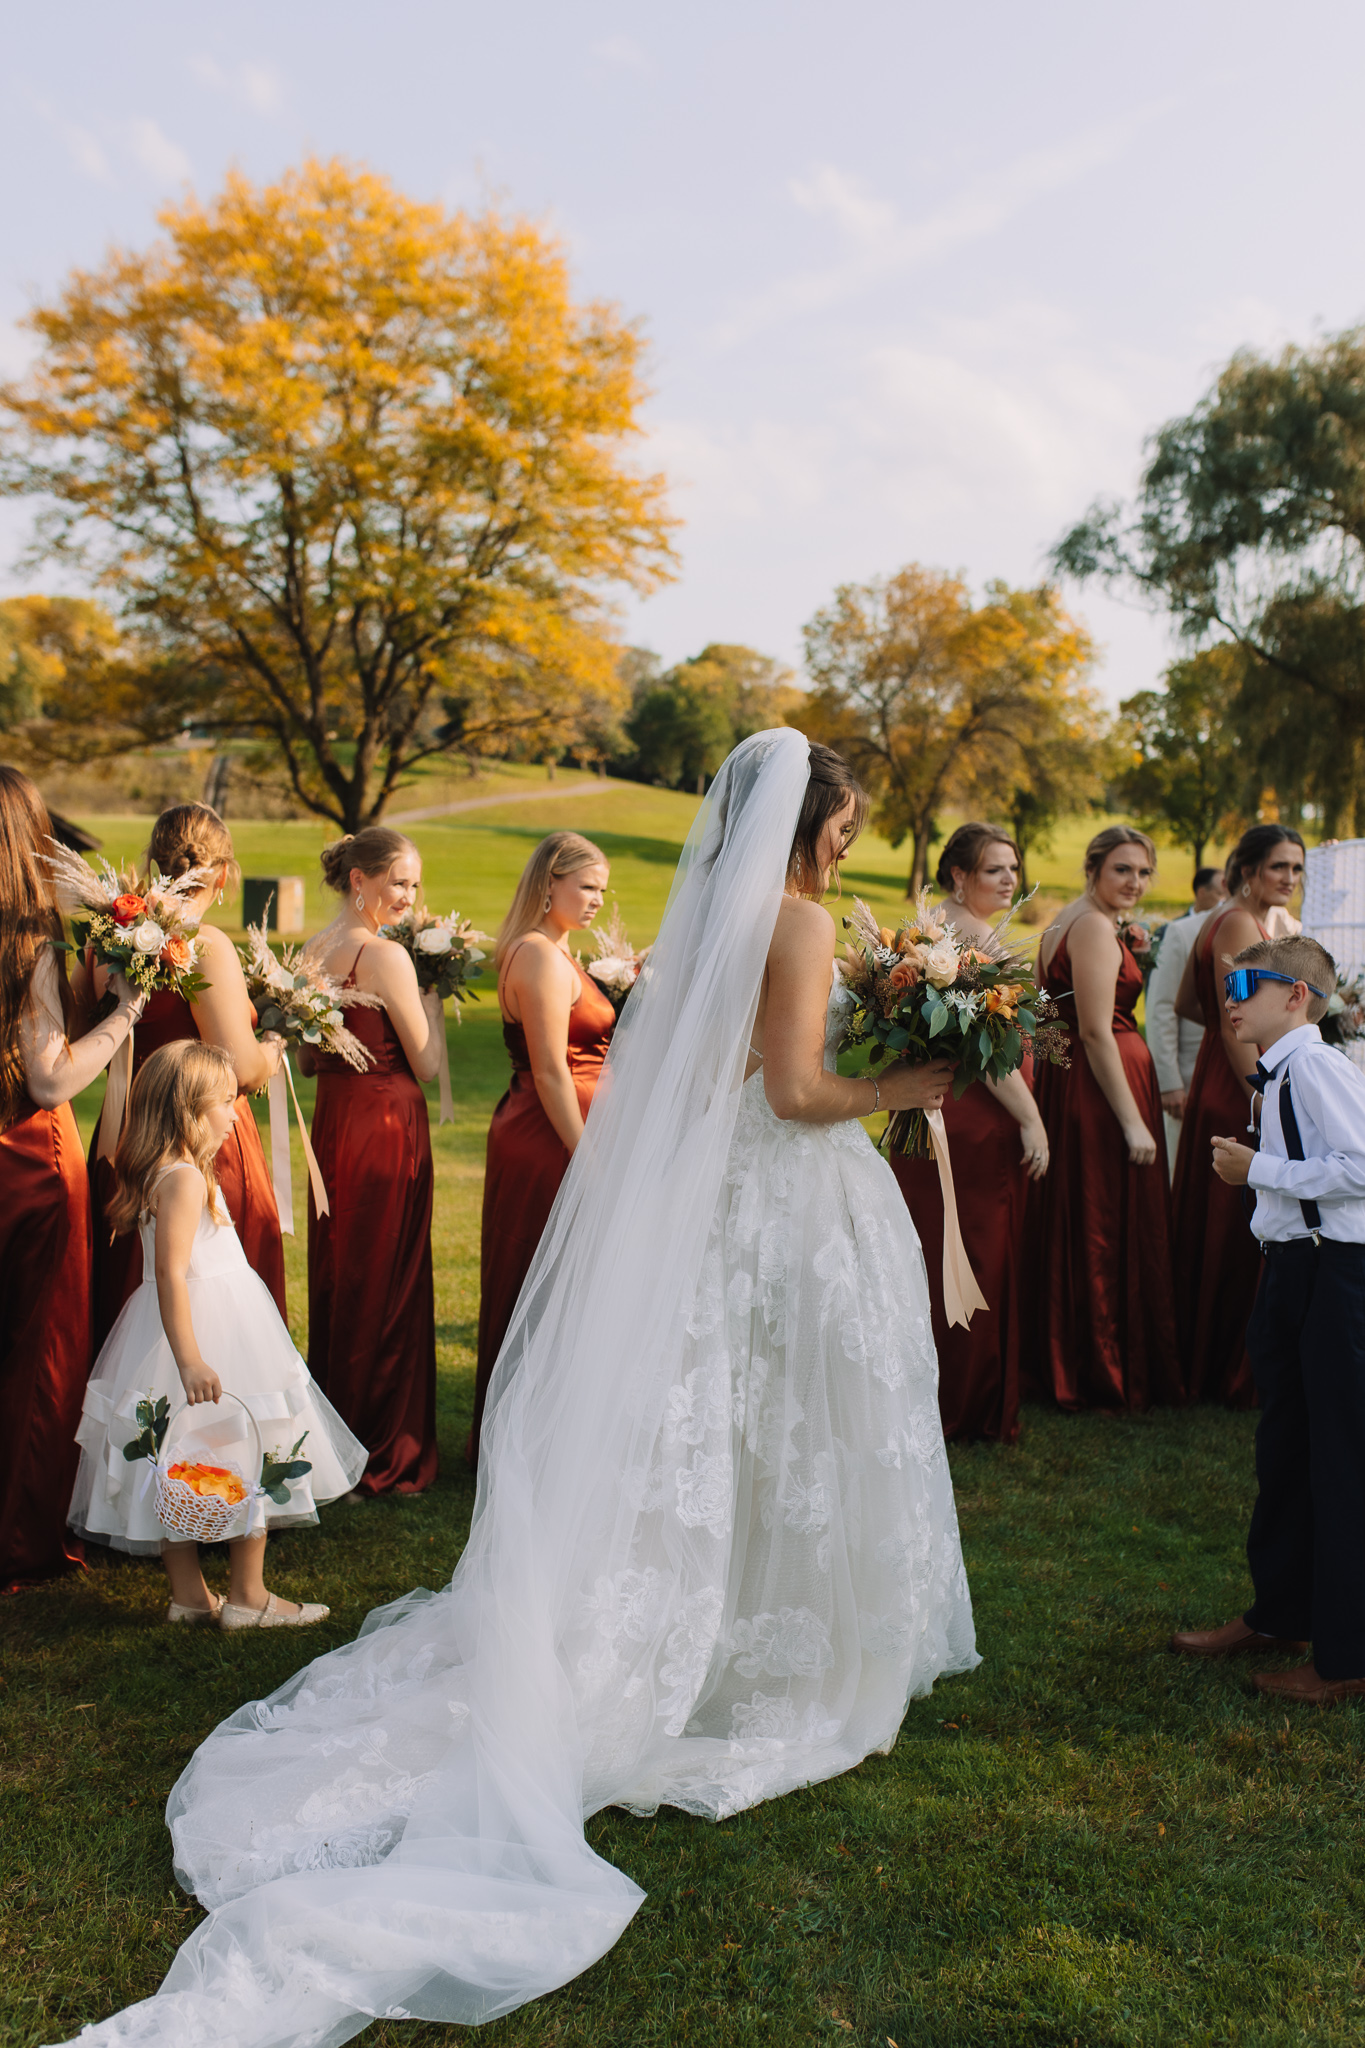 A bride walking down the aisle at her outdoor wedding ceremony in Stillwater, Minnesota